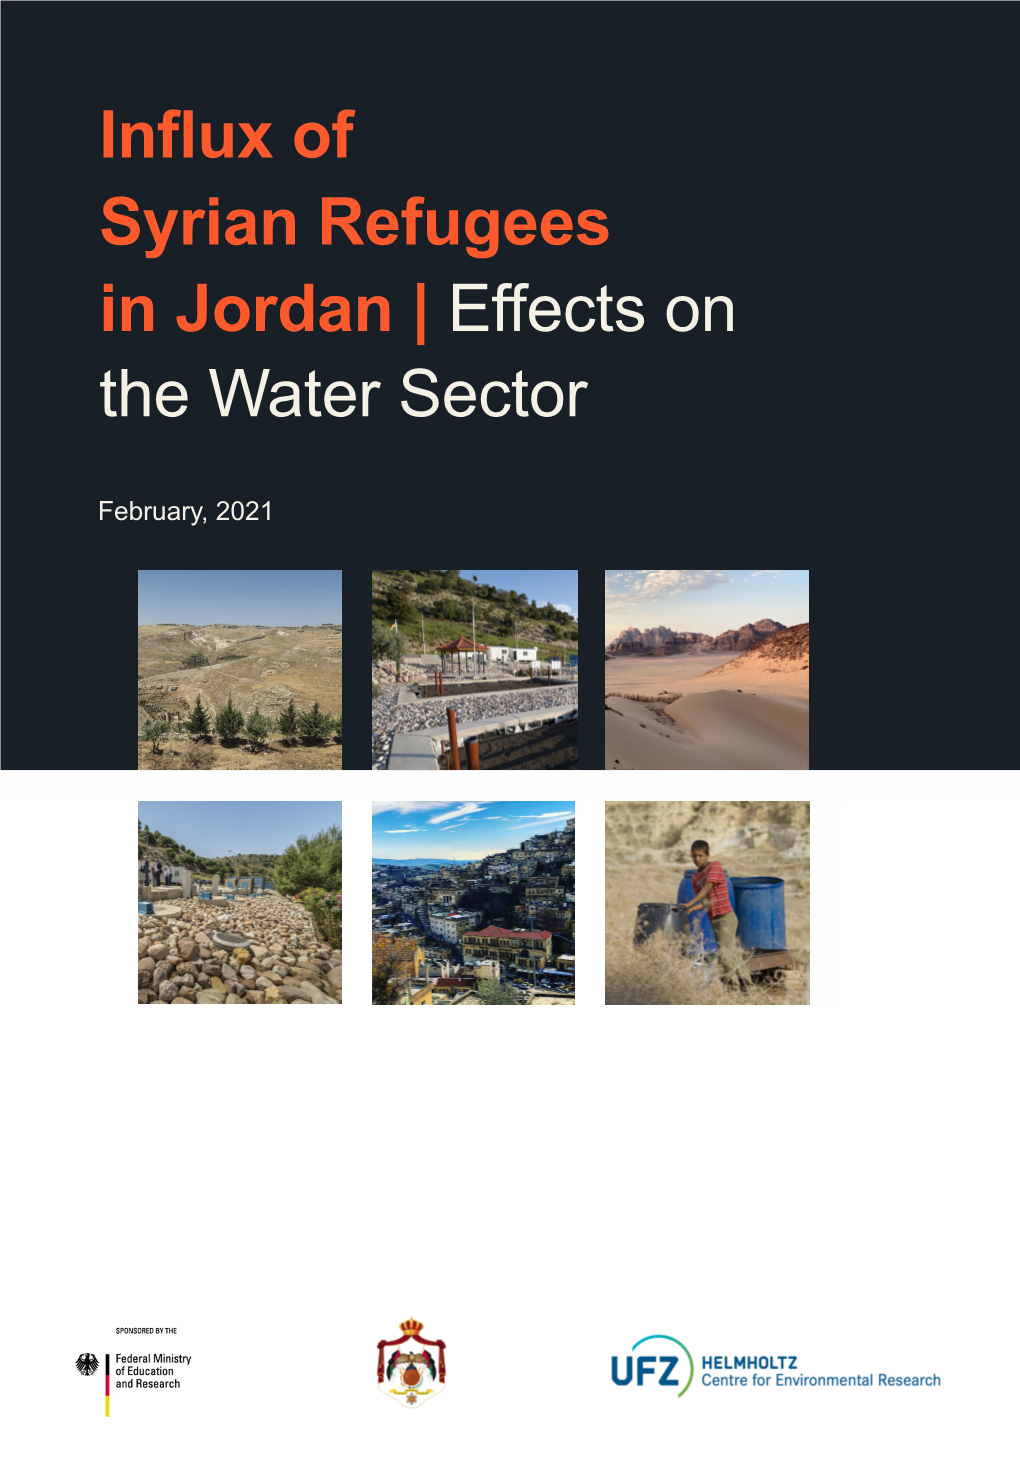 Influx of Syrian Refugees in Jordan | Effects on the Water Sector